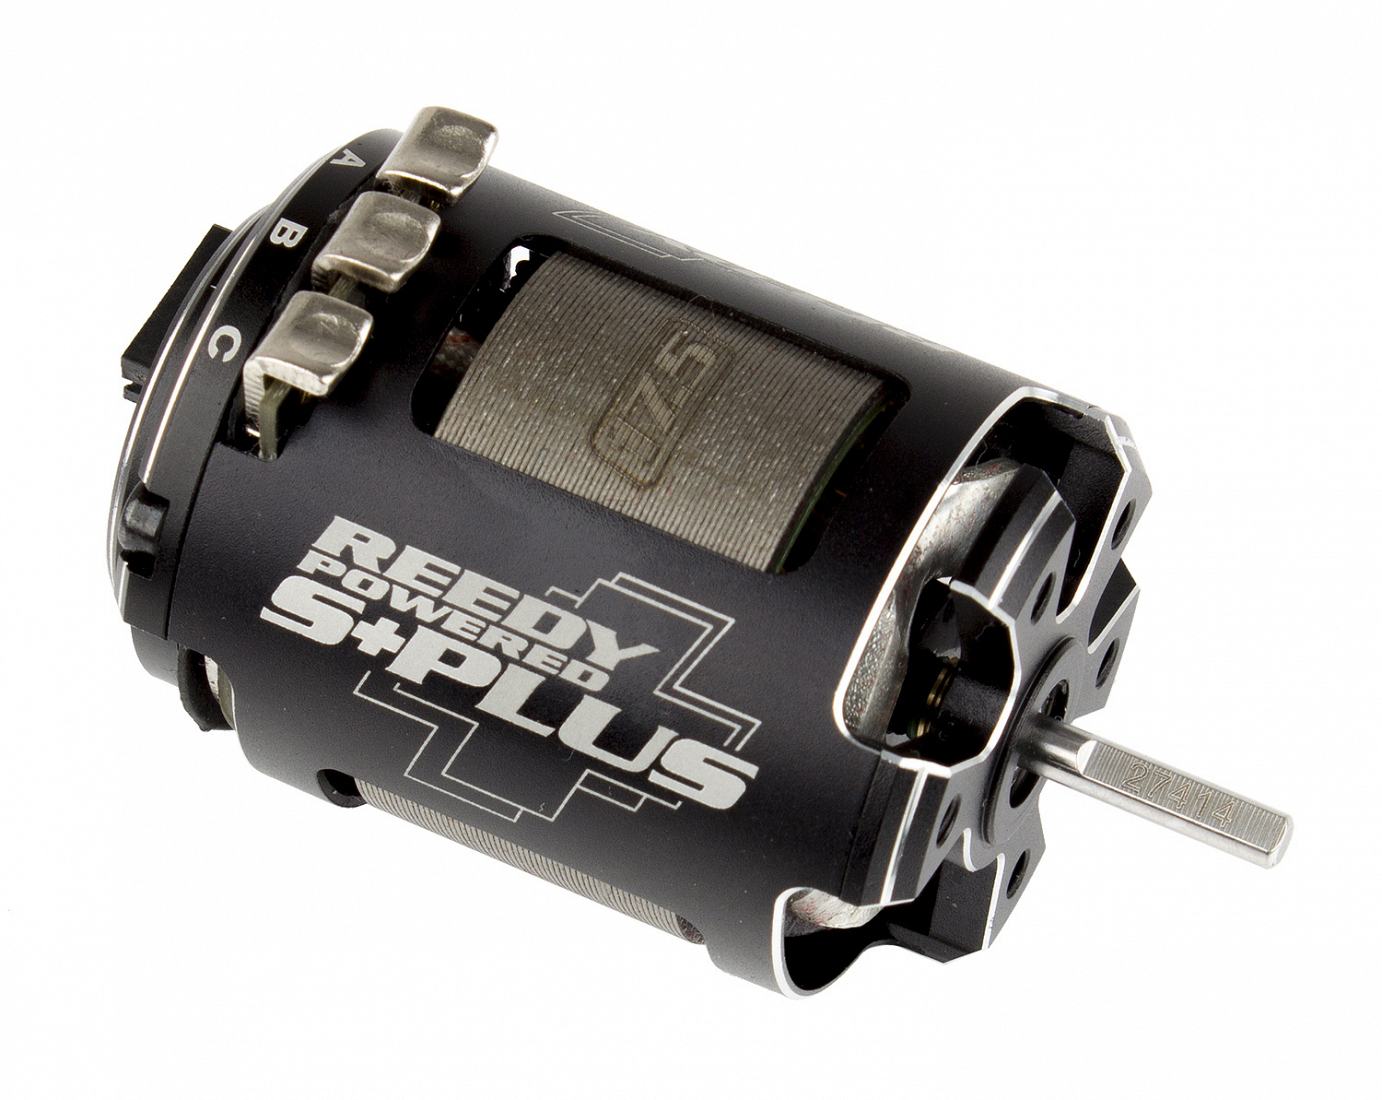 Reedy S-Plus 17.5 Competition Spec Class Motor